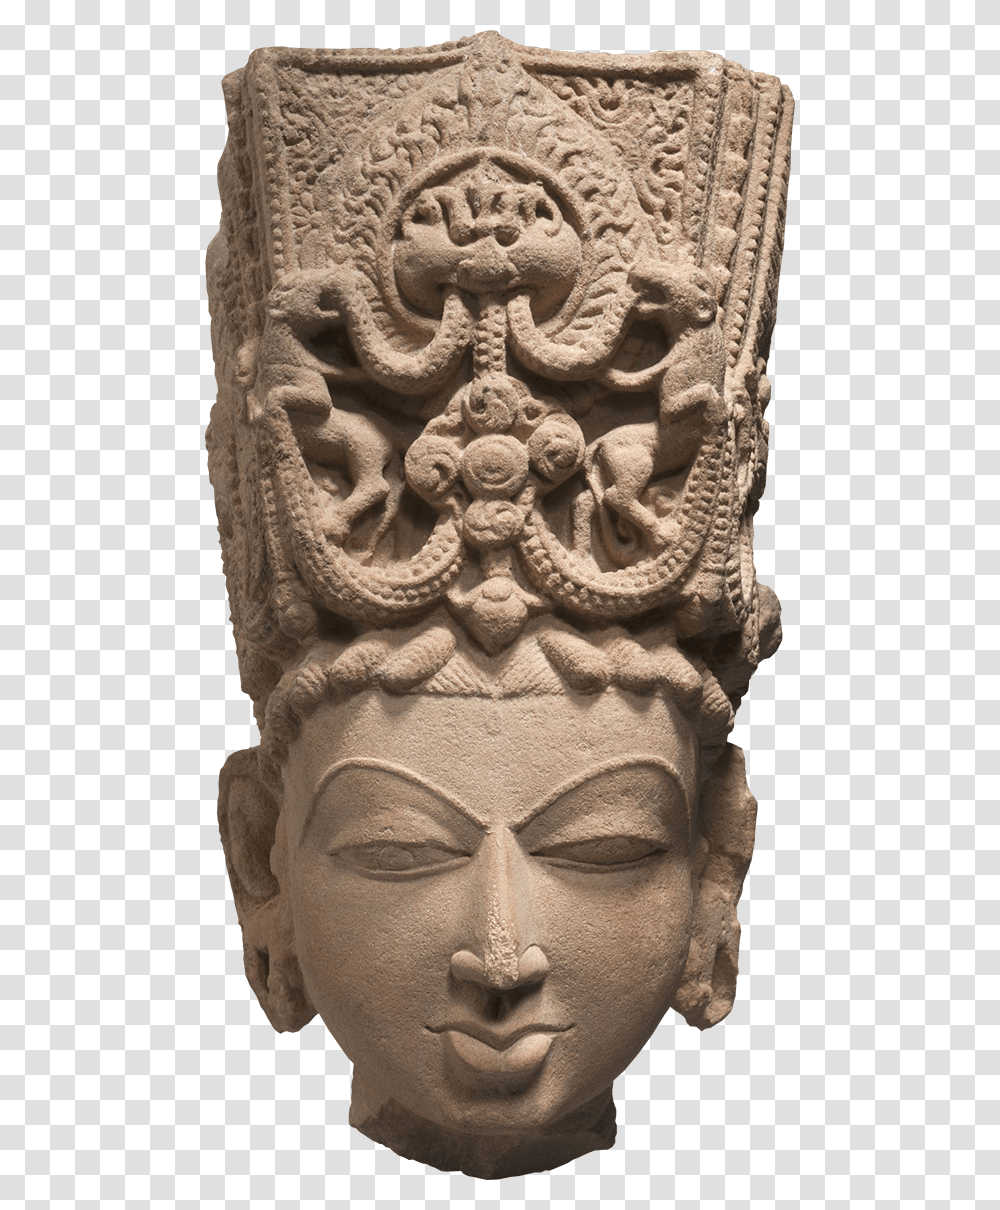 Crowned Head Of Vishnu Or Surya Islamic Sculpture In India, Archaeology, Statue, Architecture Transparent Png